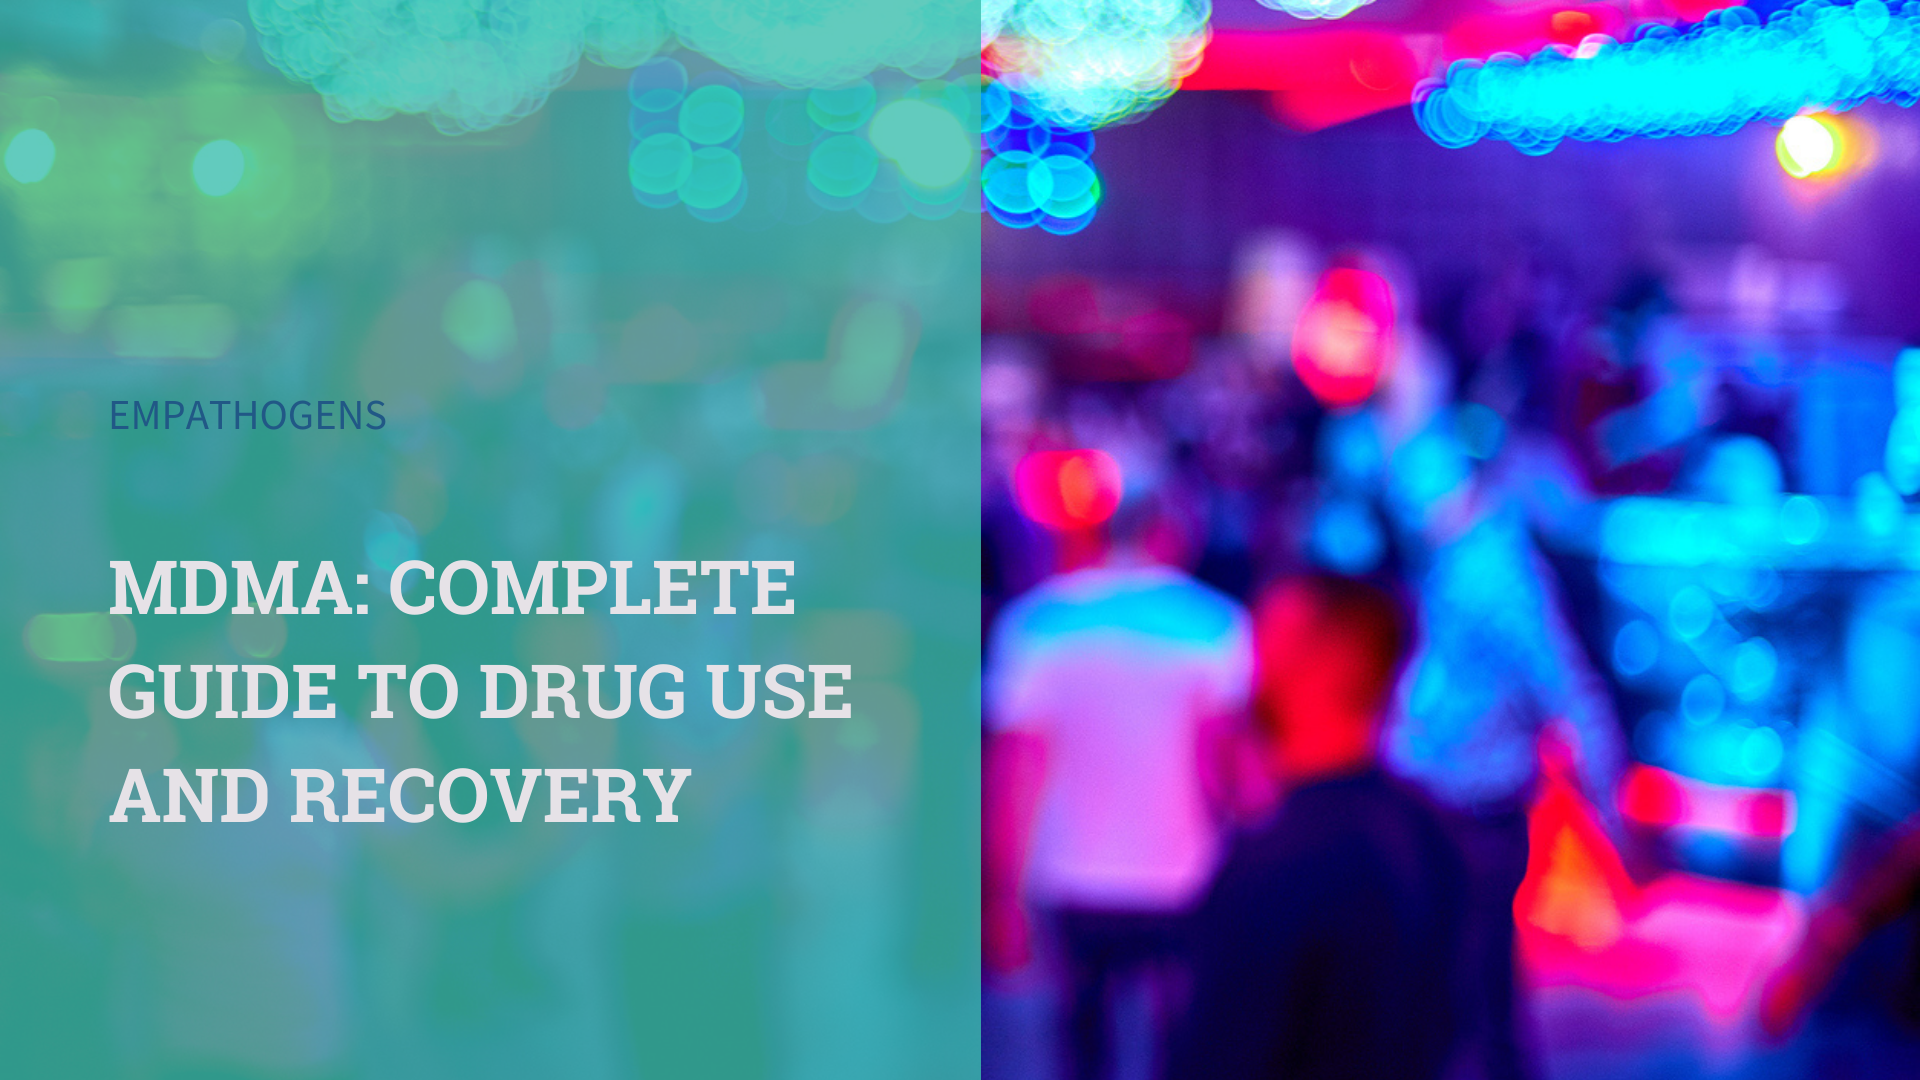 MDMA: Complete Guide to Drug Use and Recovery